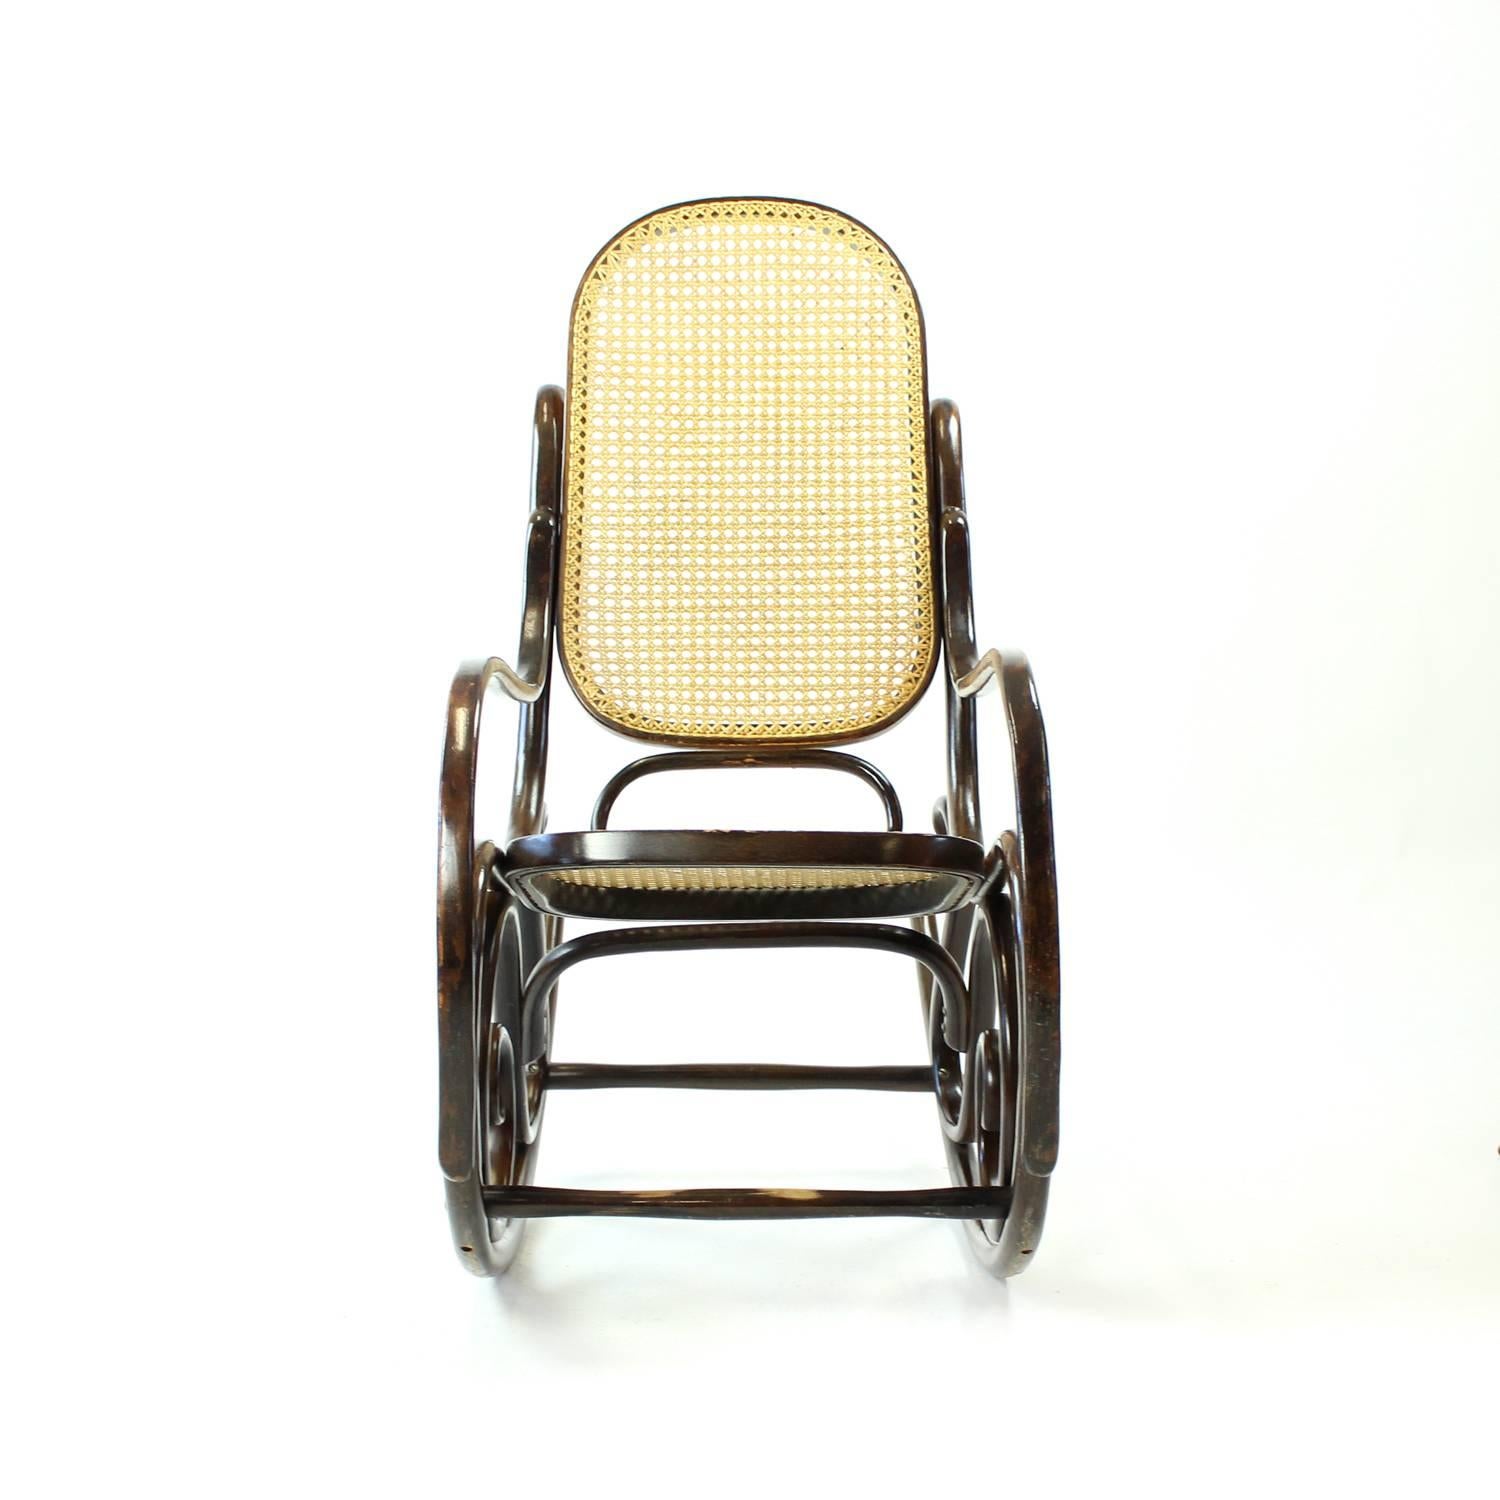 Beautiful rocking chairs in Thonet style, made of dark bentwood. Most beautiful construction with lots of details. Original weaving in very good condition with some minor wear and signs of use. Some patina visible on the armrests, too. But it makes